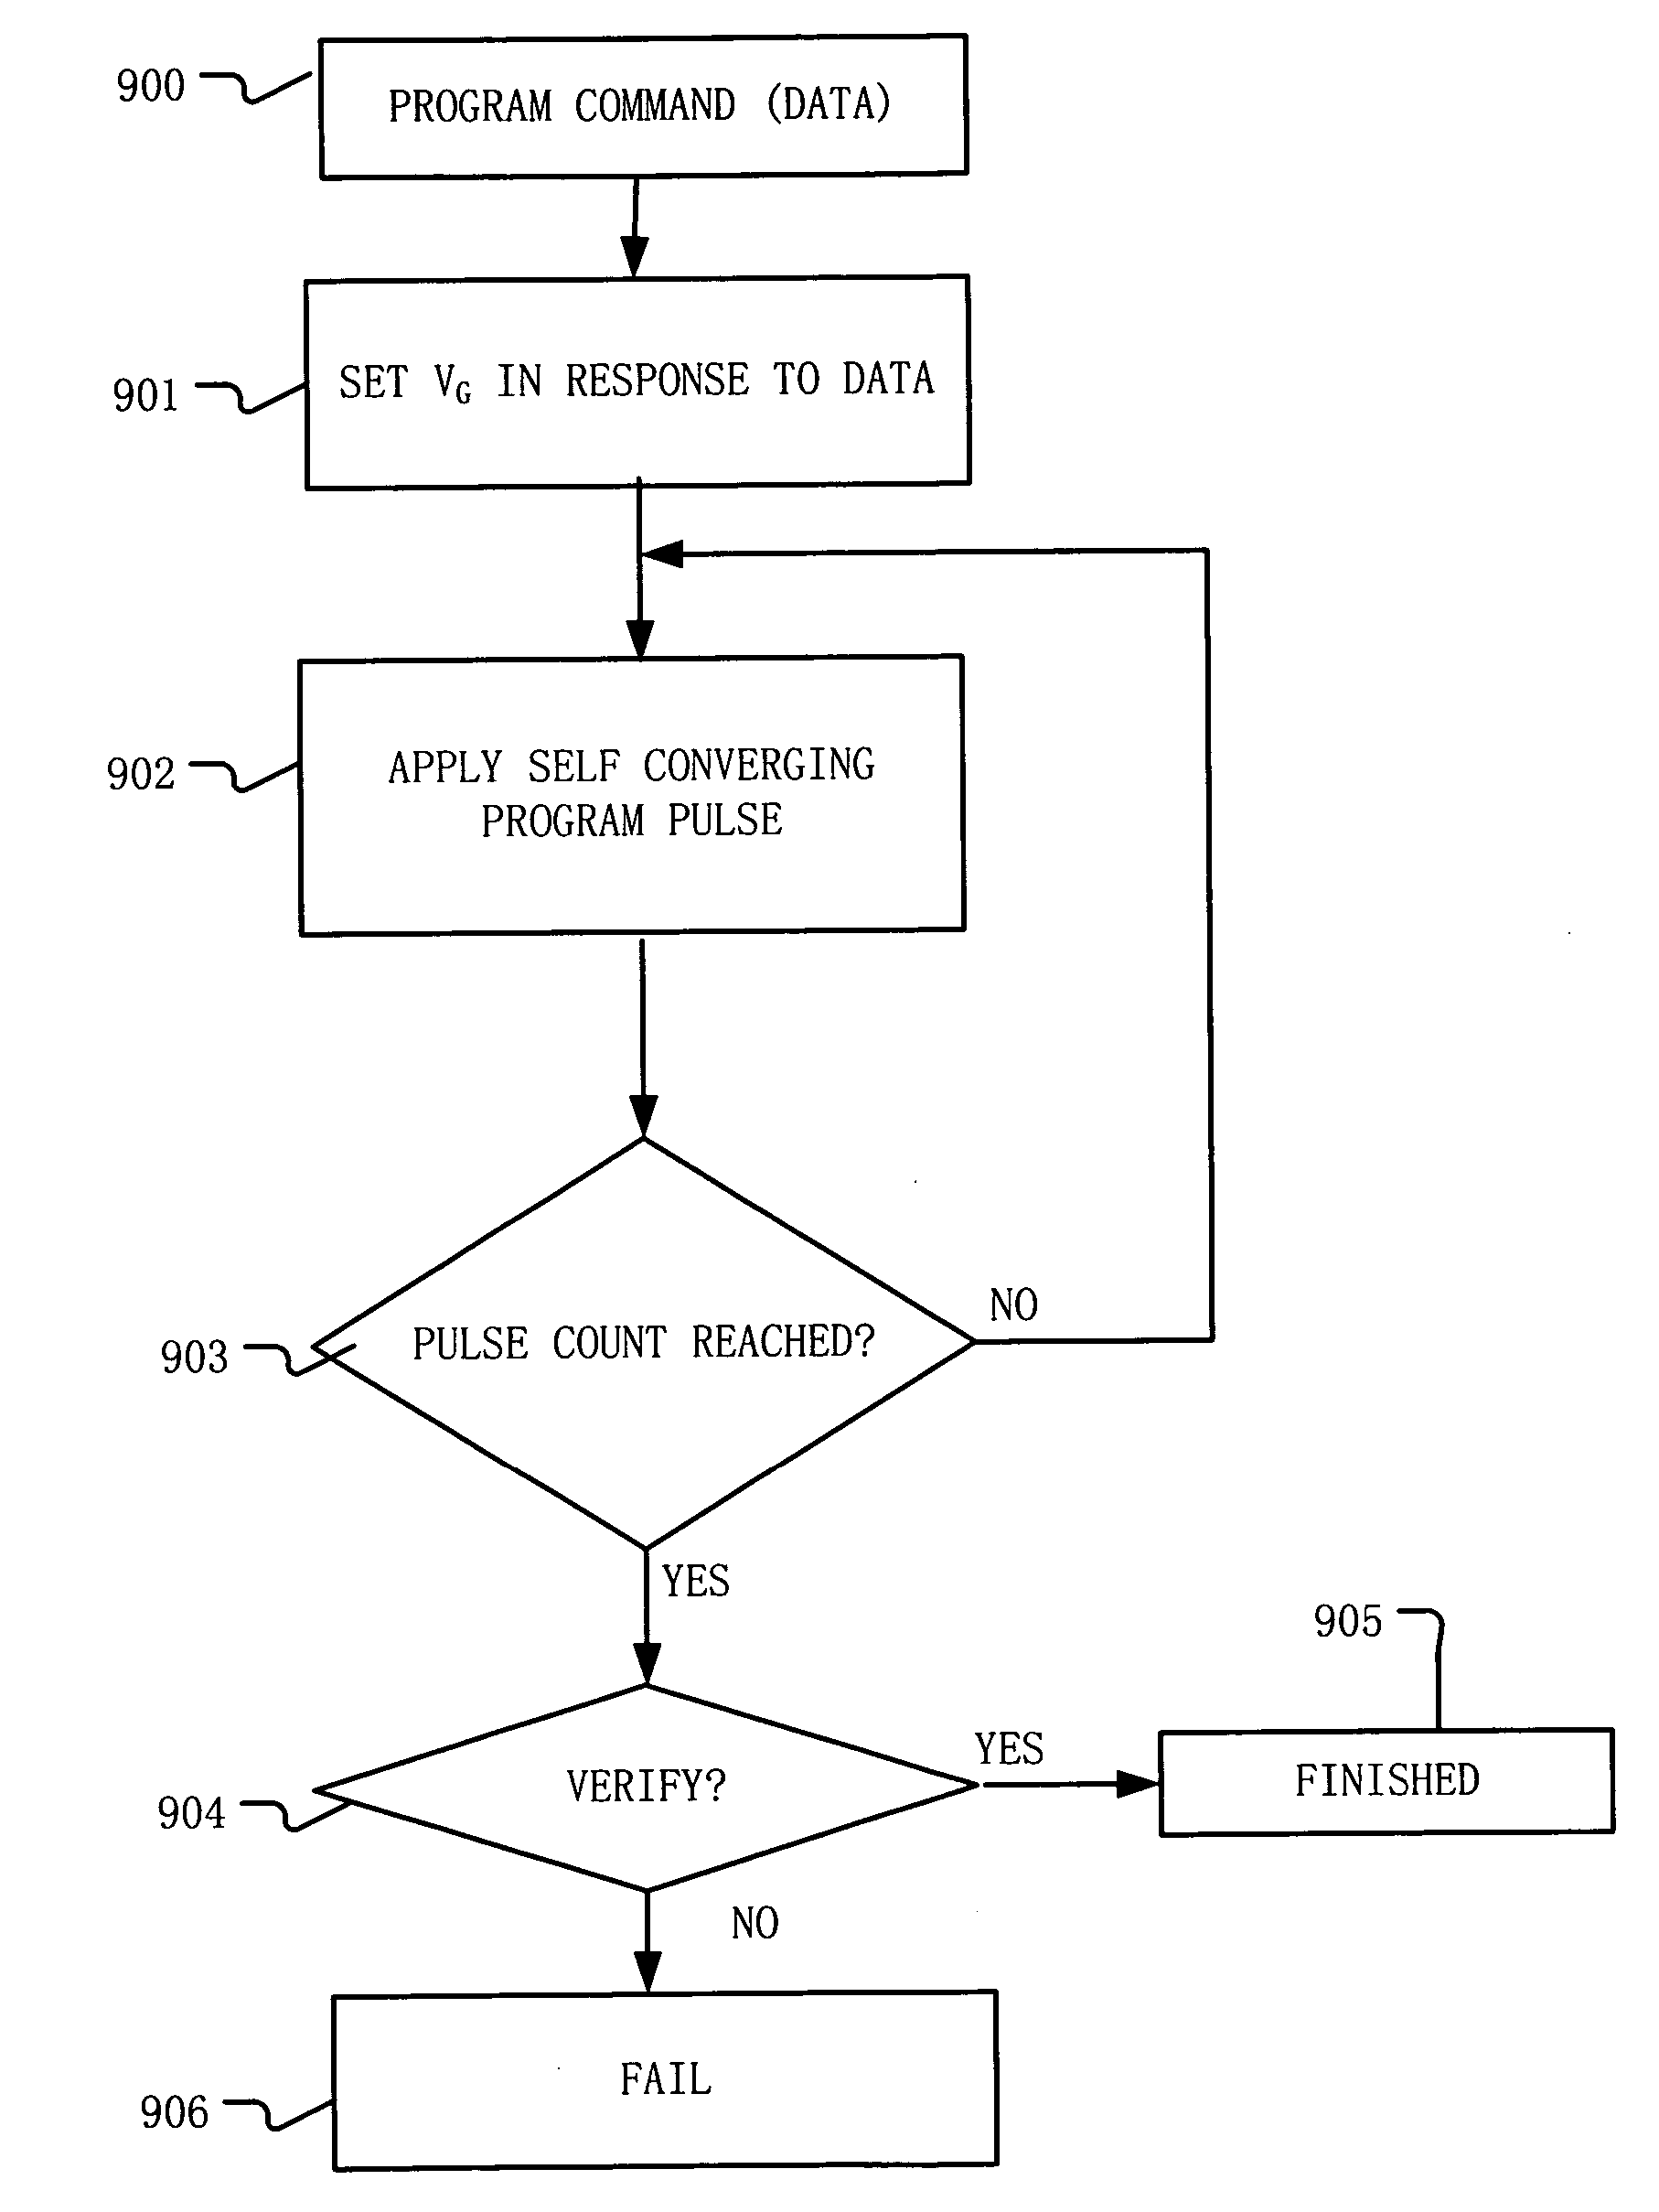 Operation scheme for programming charge trapping non-volatile memory